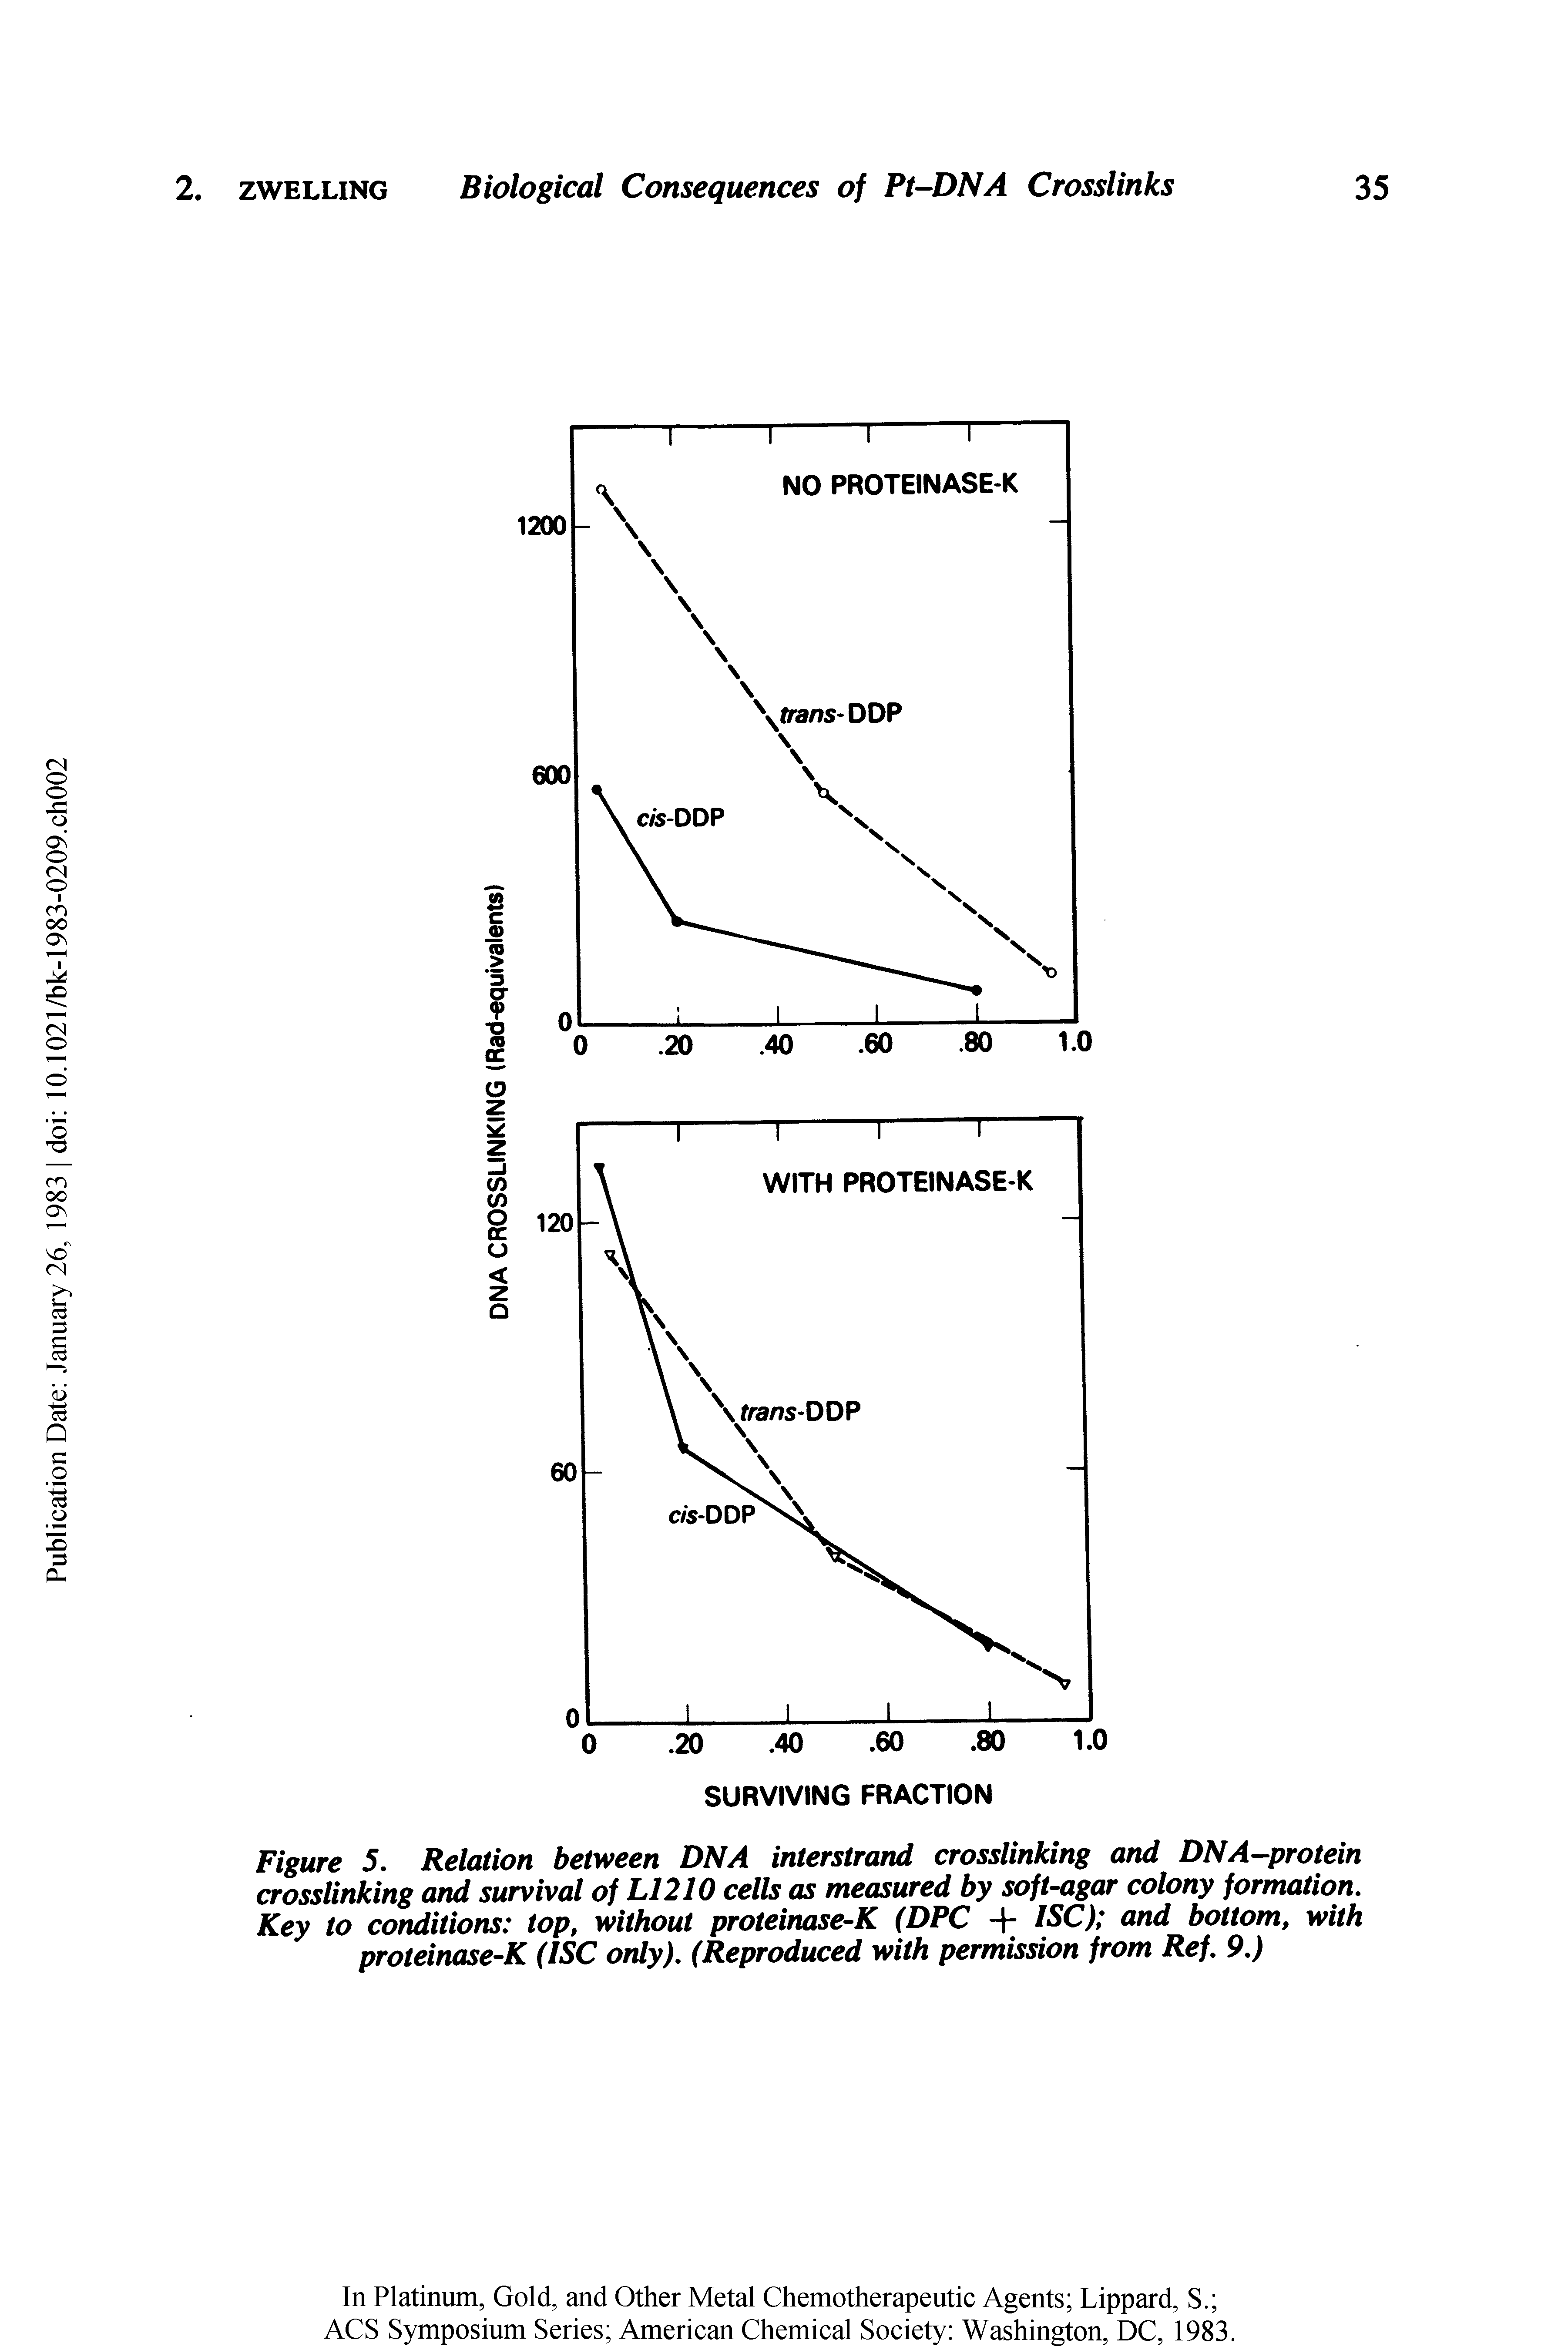 Figure 5. Relation between DNA interstrand crosslinking and DNA protein crosslinking and survival of L1210 cells as measured by soft-agar colony formation. Key to conditions top, without proteinase-K (DPC + ISC) and bottom, with proteinase-K (ISC only). (Reproduced with permission from Ref. 9.)...